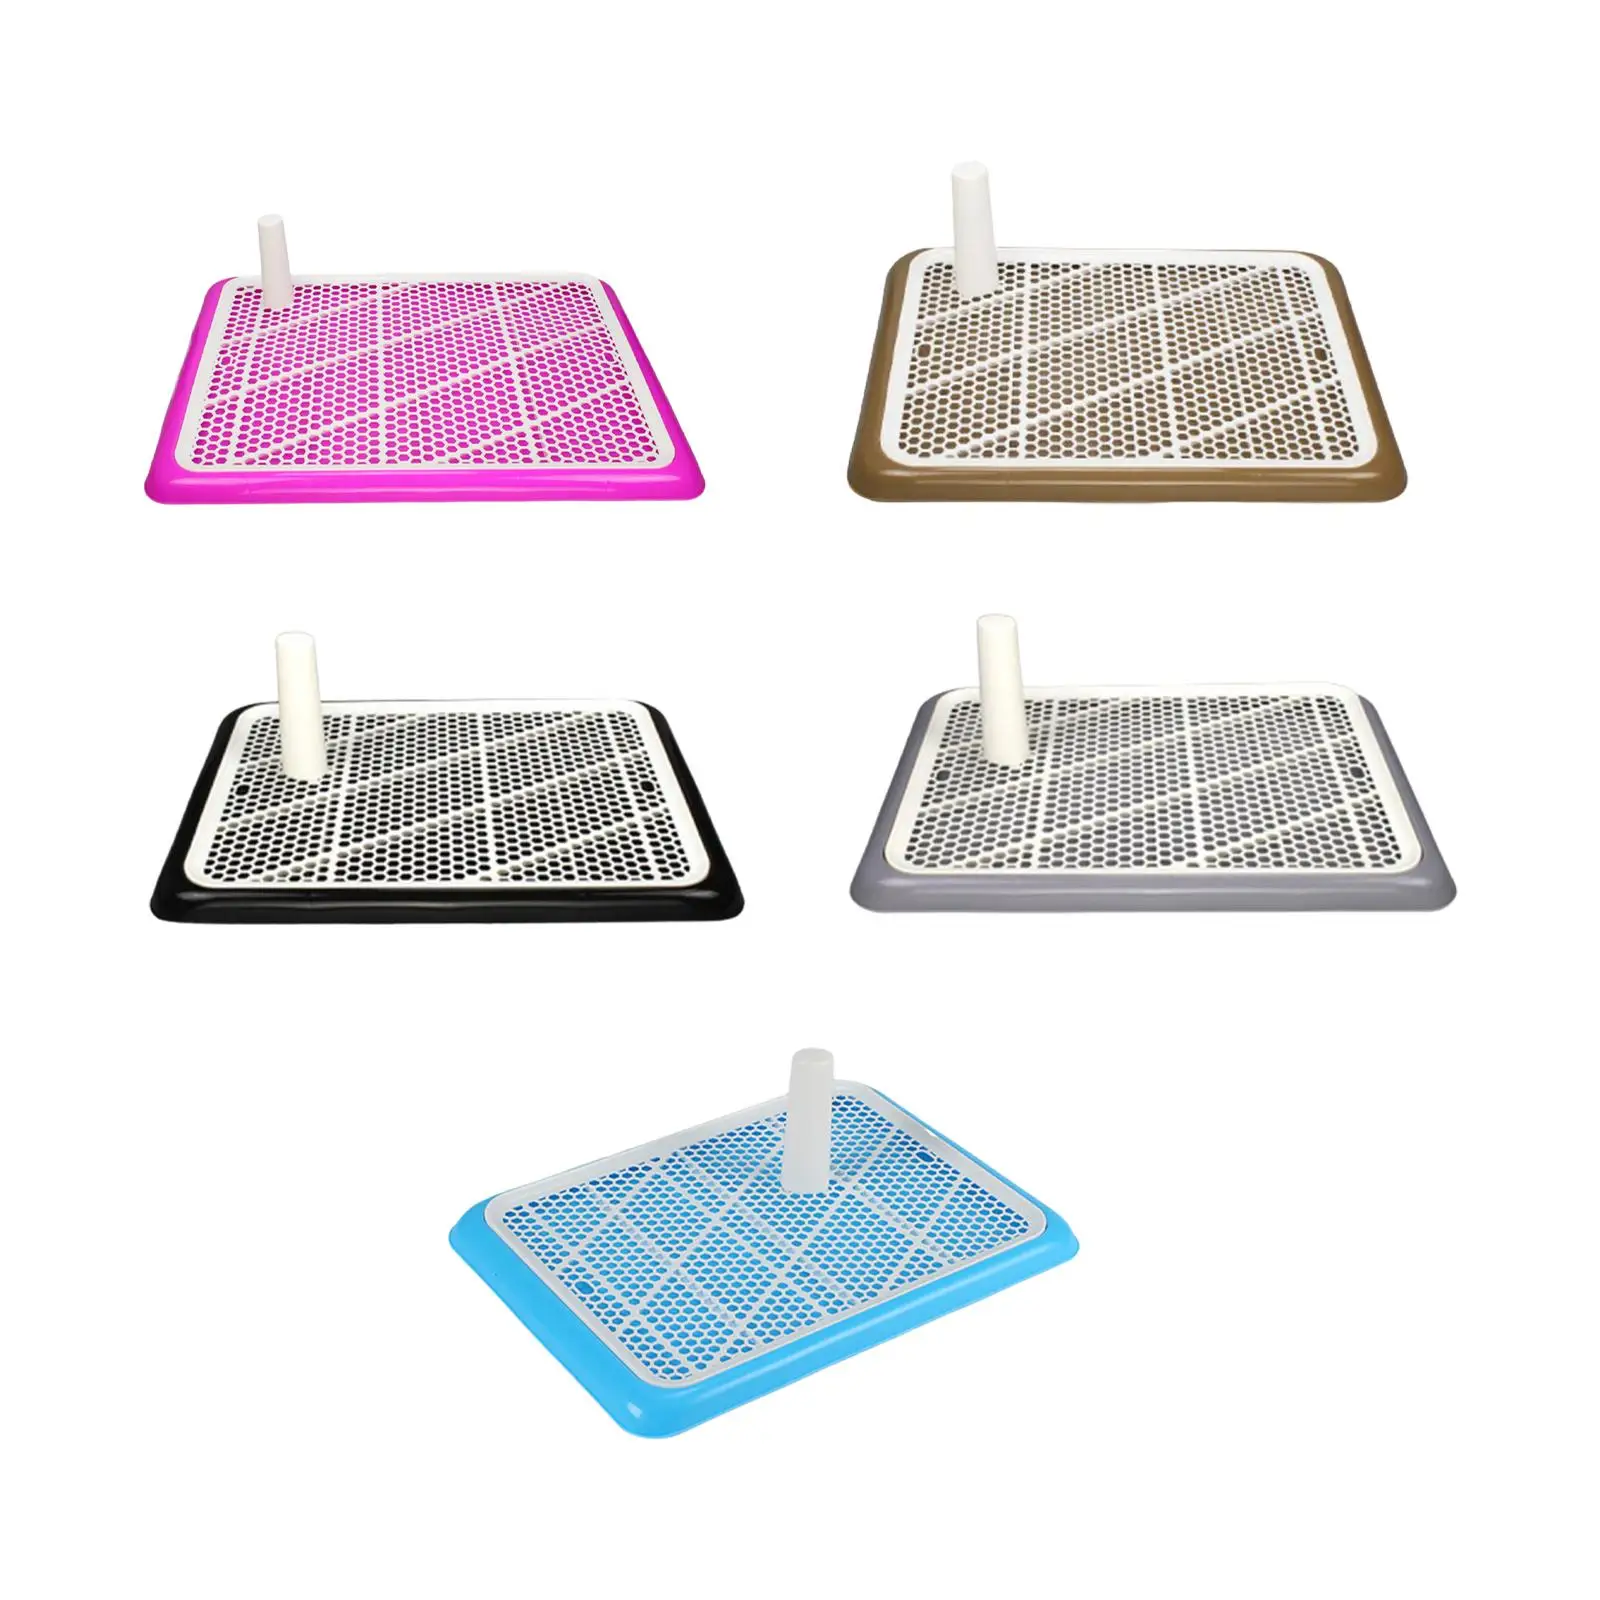 Puppy Training Toilet Portable Floor Protection Grid Separated Groove Design Mesh Training Pad Holder for Pet Supplies Indoor